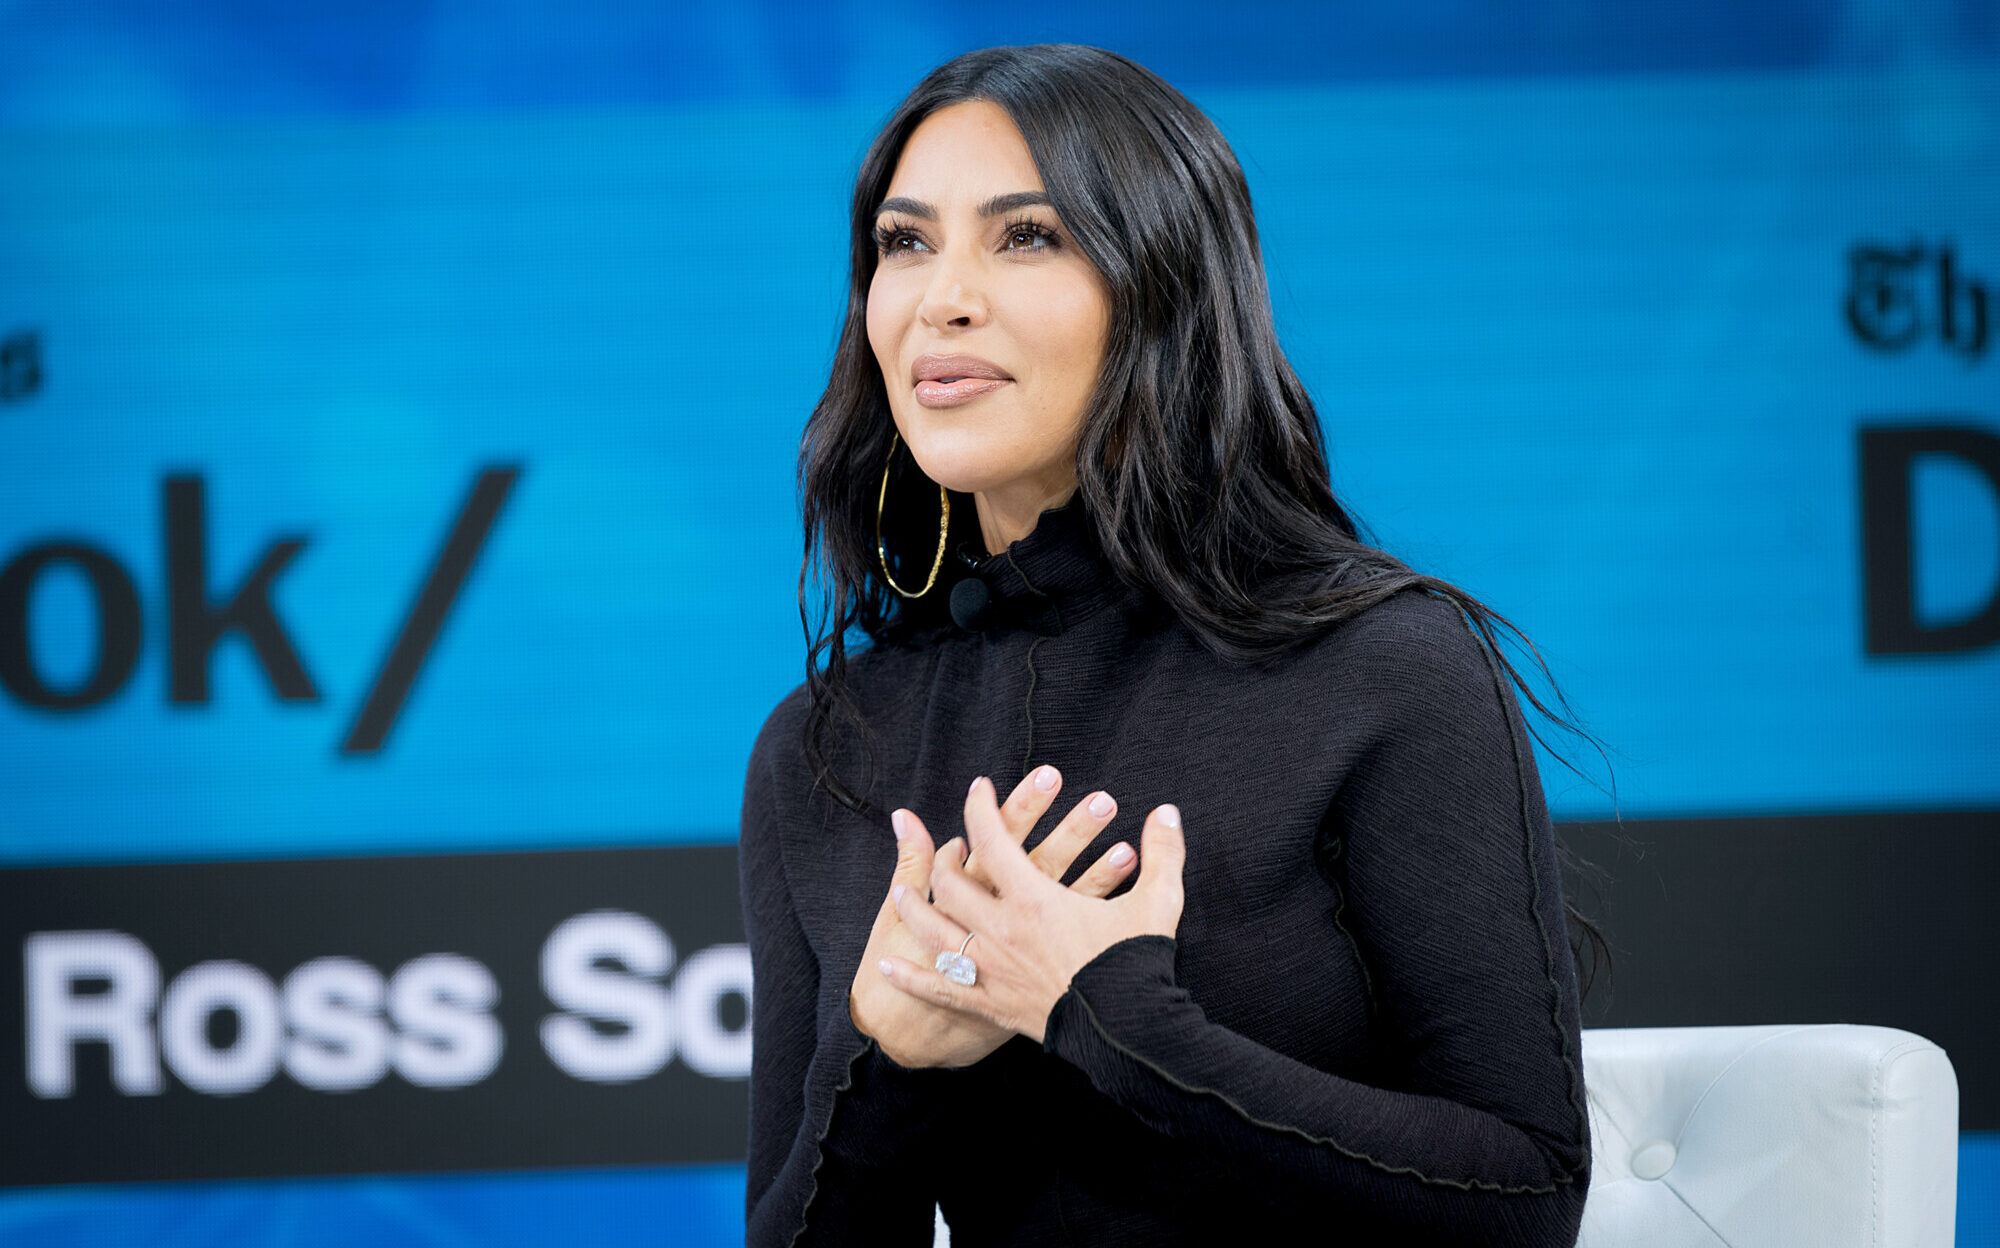 Kim Kardashian West Is Officially a Billionaire, Says Forbes